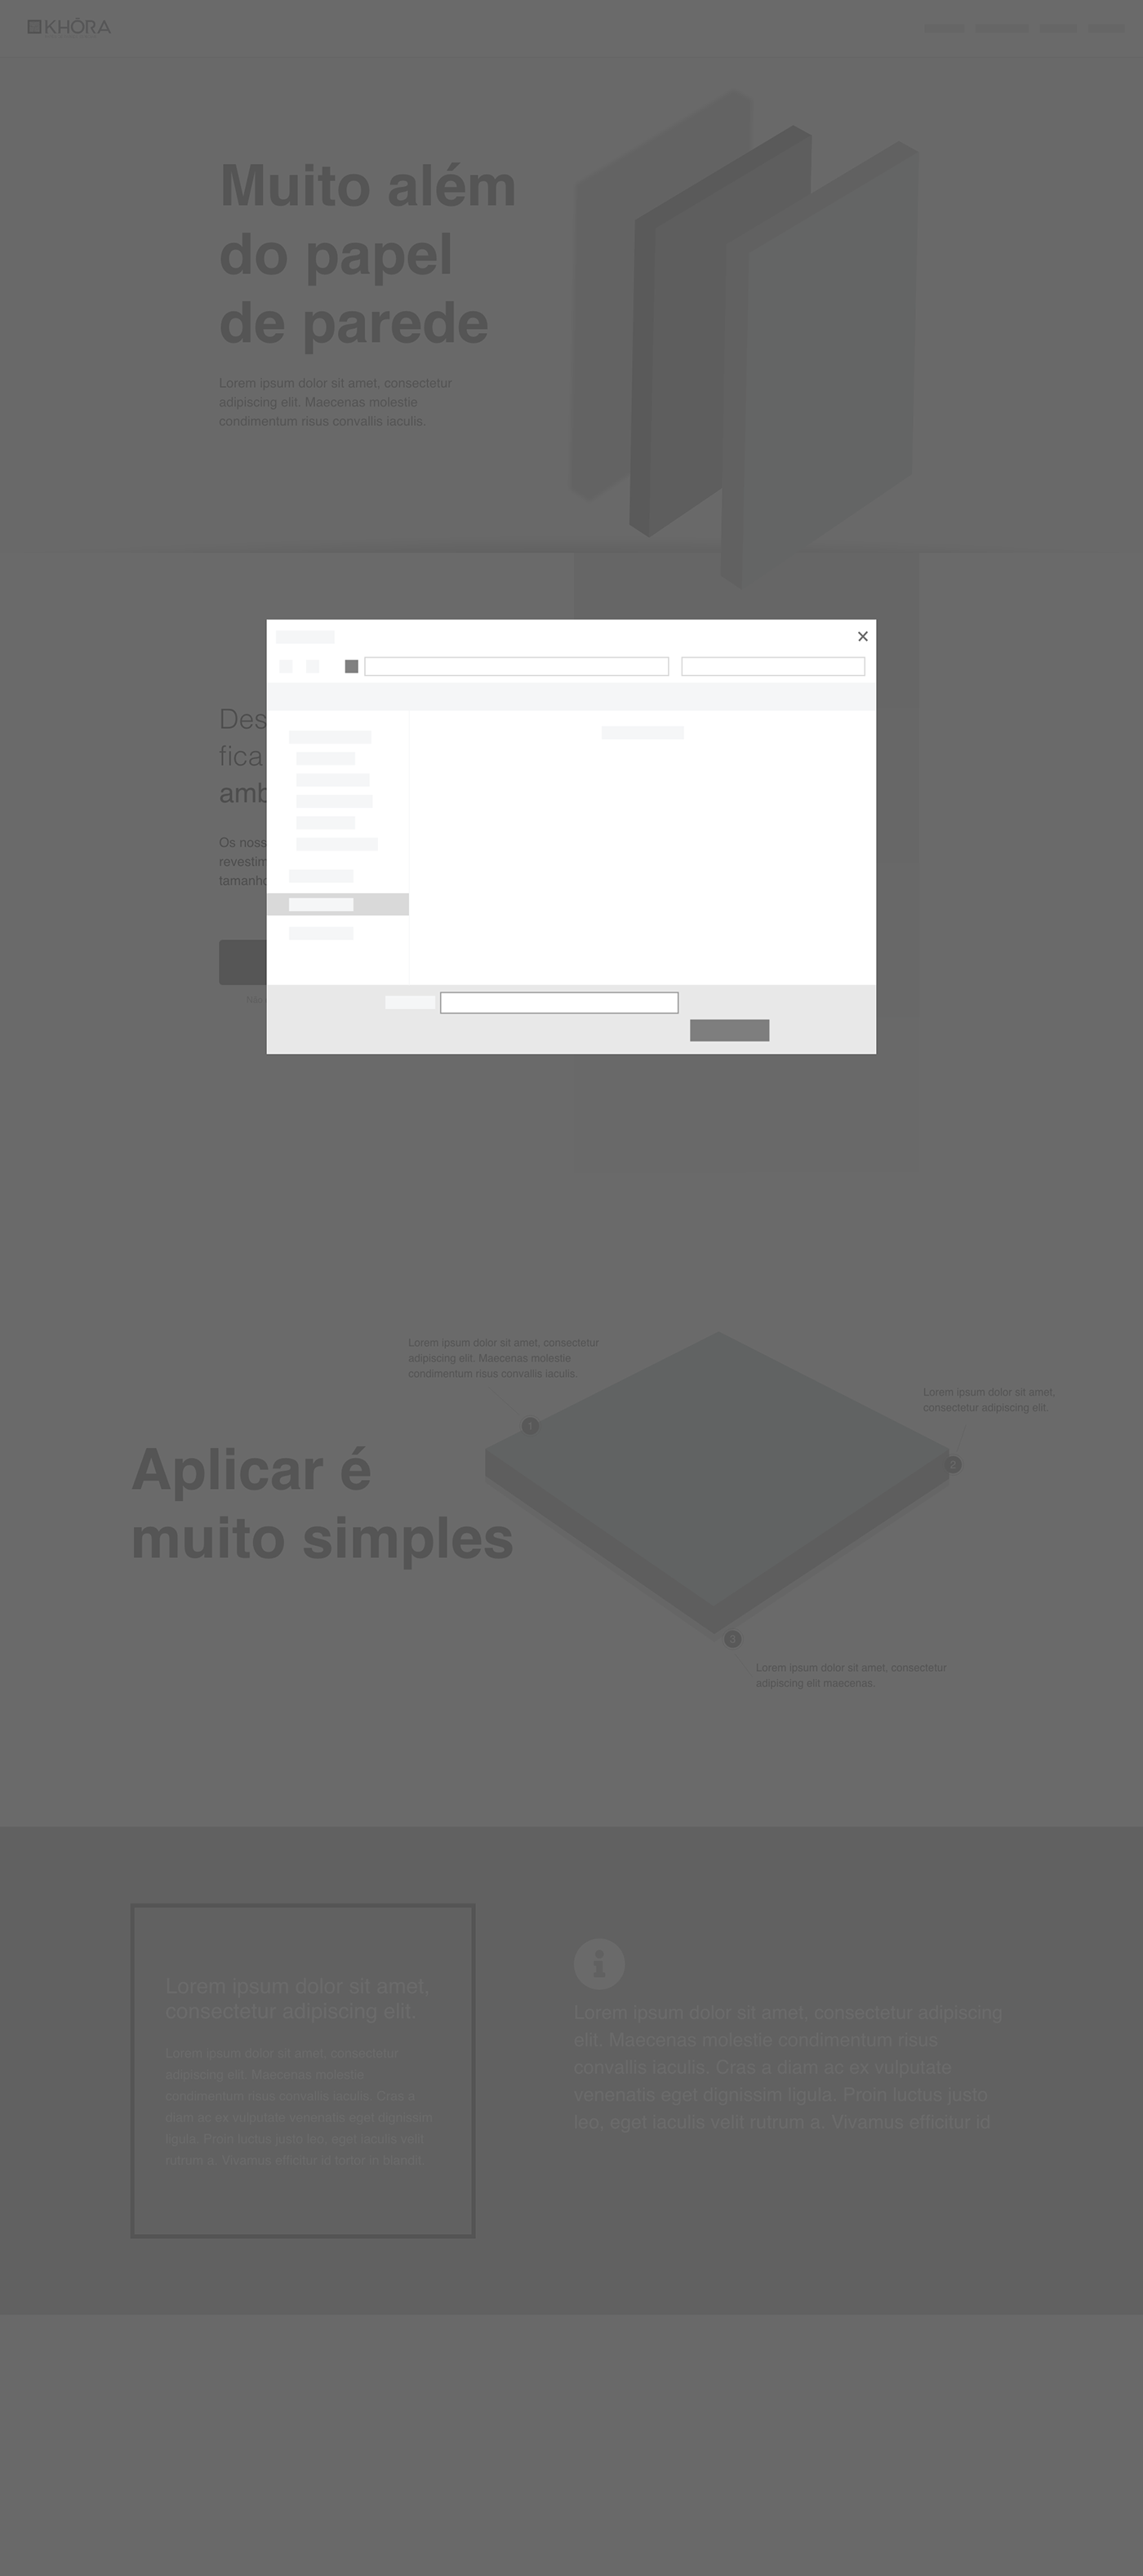 Ecommerce shopping experience web application wireframe